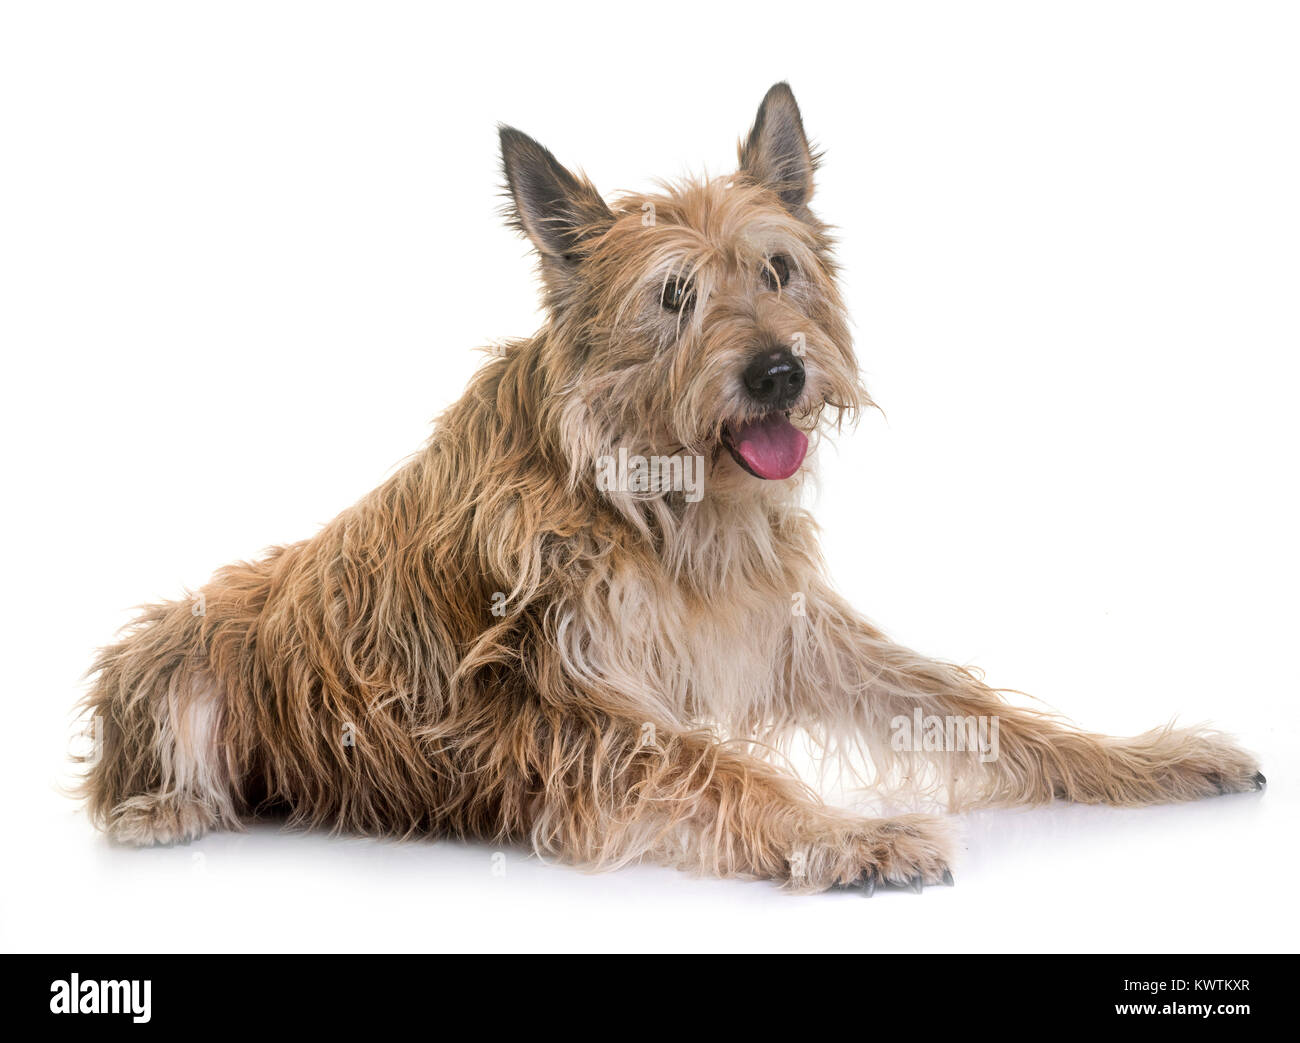 Picardie shepherd in front of white background Banque D'Images